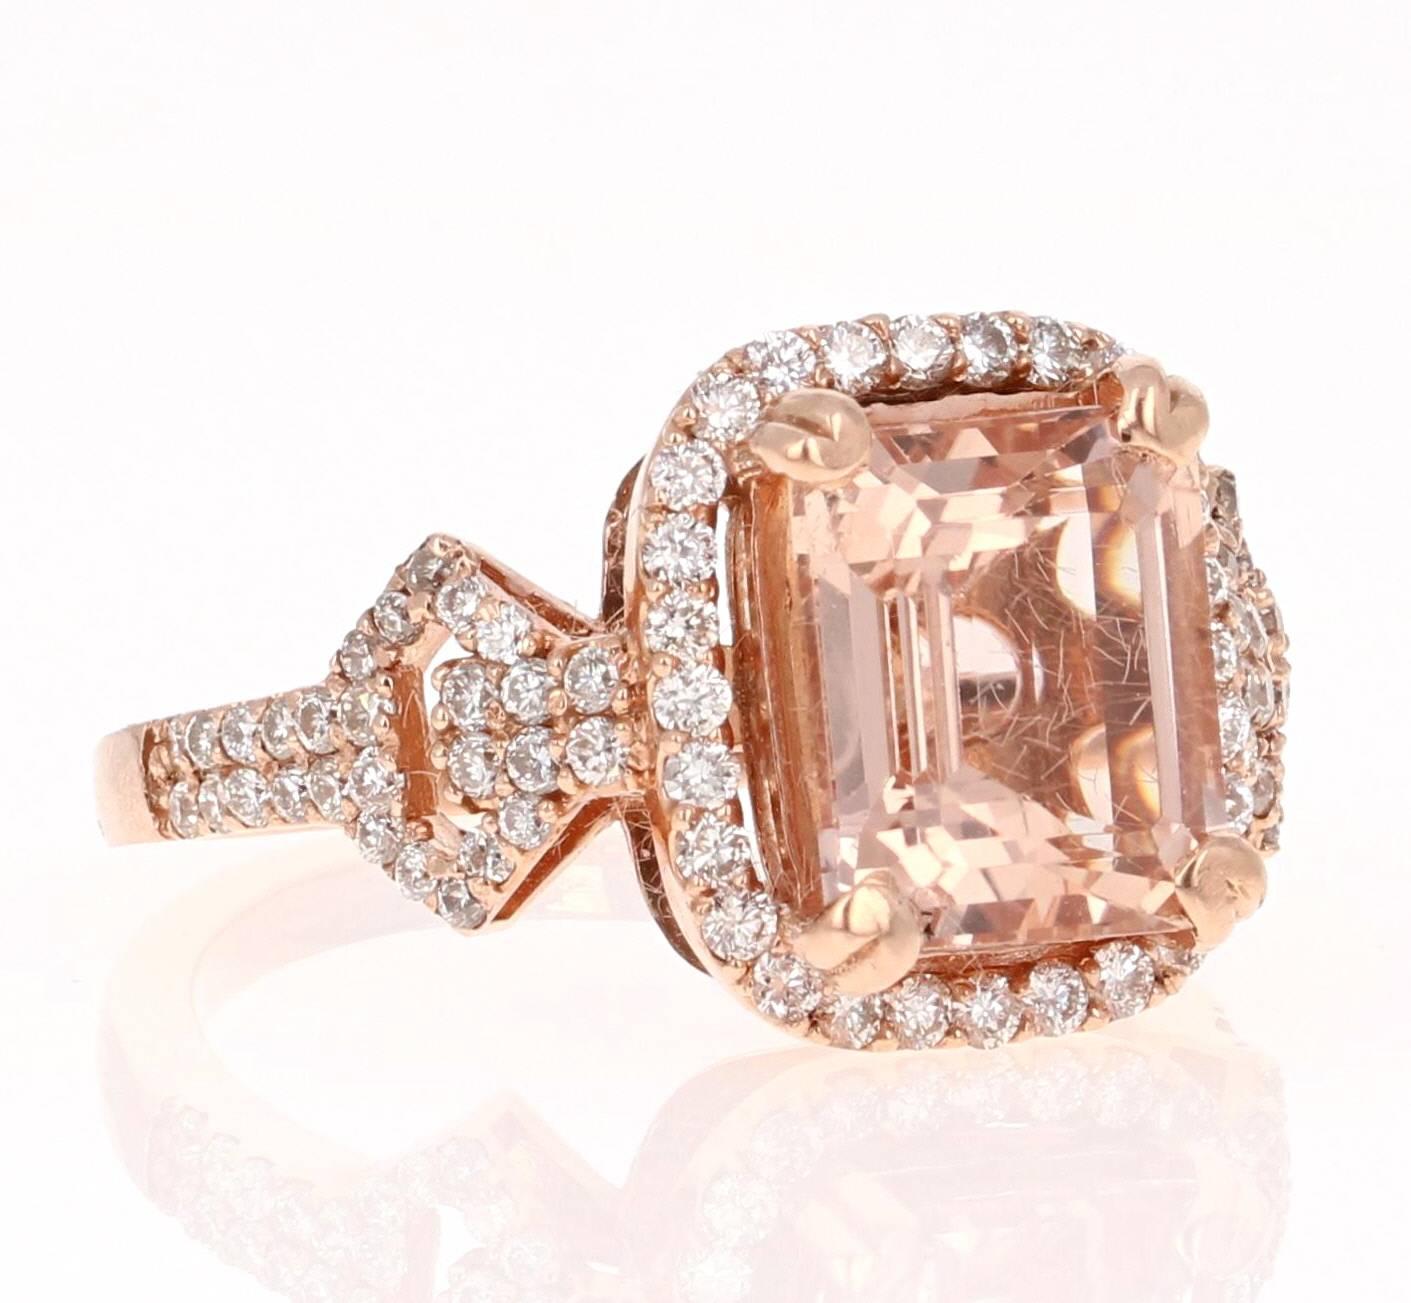 4.21 Carat Emerald Cut Morganite Diamond Rose Gold Cocktail Ring!

This beautiful Morganite Ring has a Emerald Cut 3.51 Carat Morganite as its center and is surrounded by 84 Round Cut Diamonds that weigh 0.70 Carats. The total carat weight of this